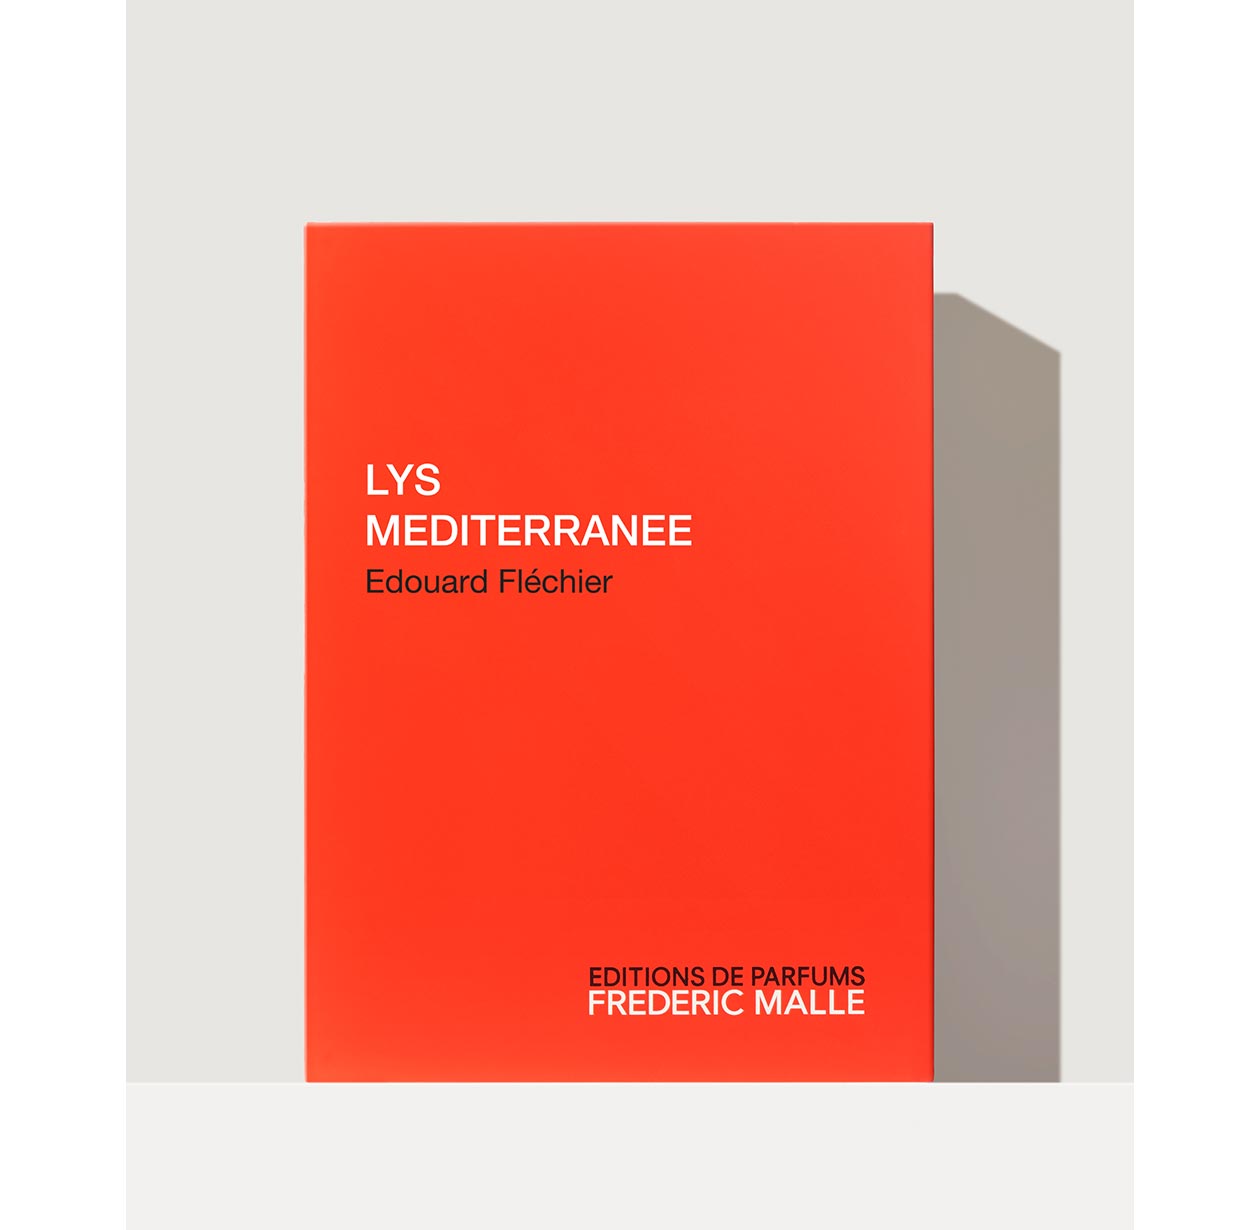 <p <span style="color:#000000;"><span style="font-size:12px;">FREDERIC MALLE </span></span></p>LYS MEDITERRANEE